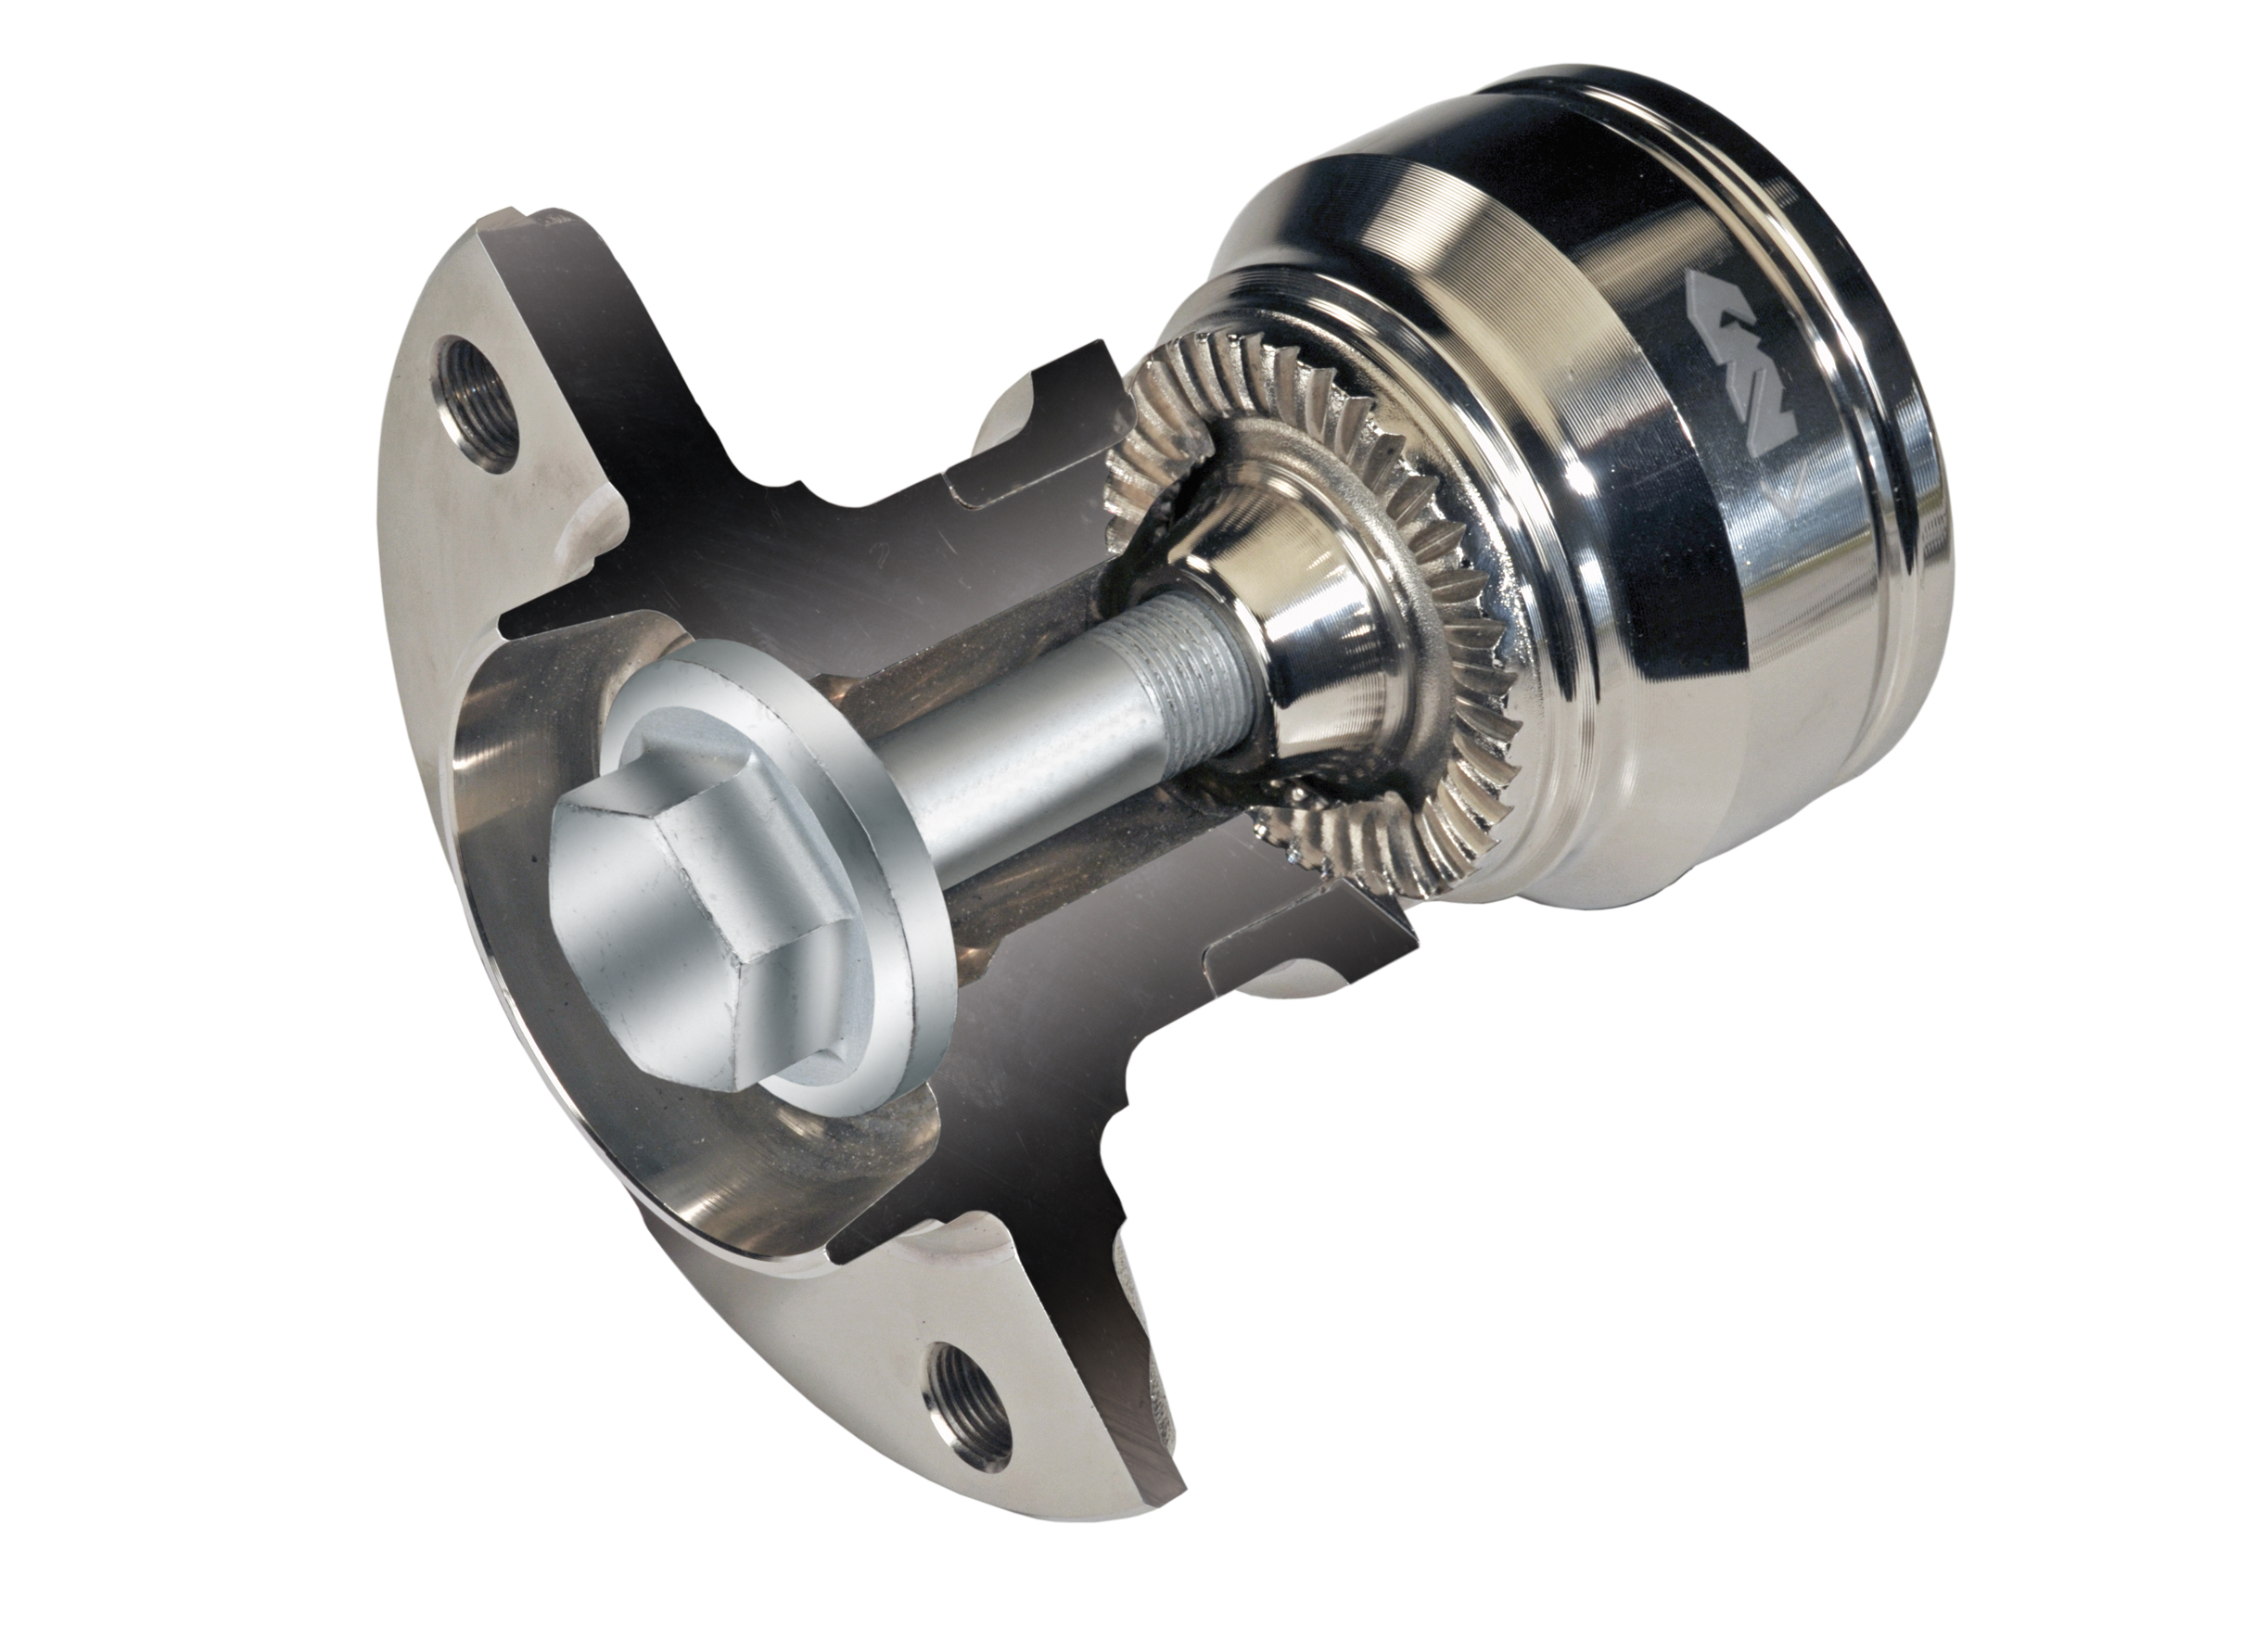 With only one bolt and the help of the cone, the Face Spline joint is securely connected and centred to the wheel hub. Thanks to the wide spline surface, the joint is more efficient than conventional pin solutions.